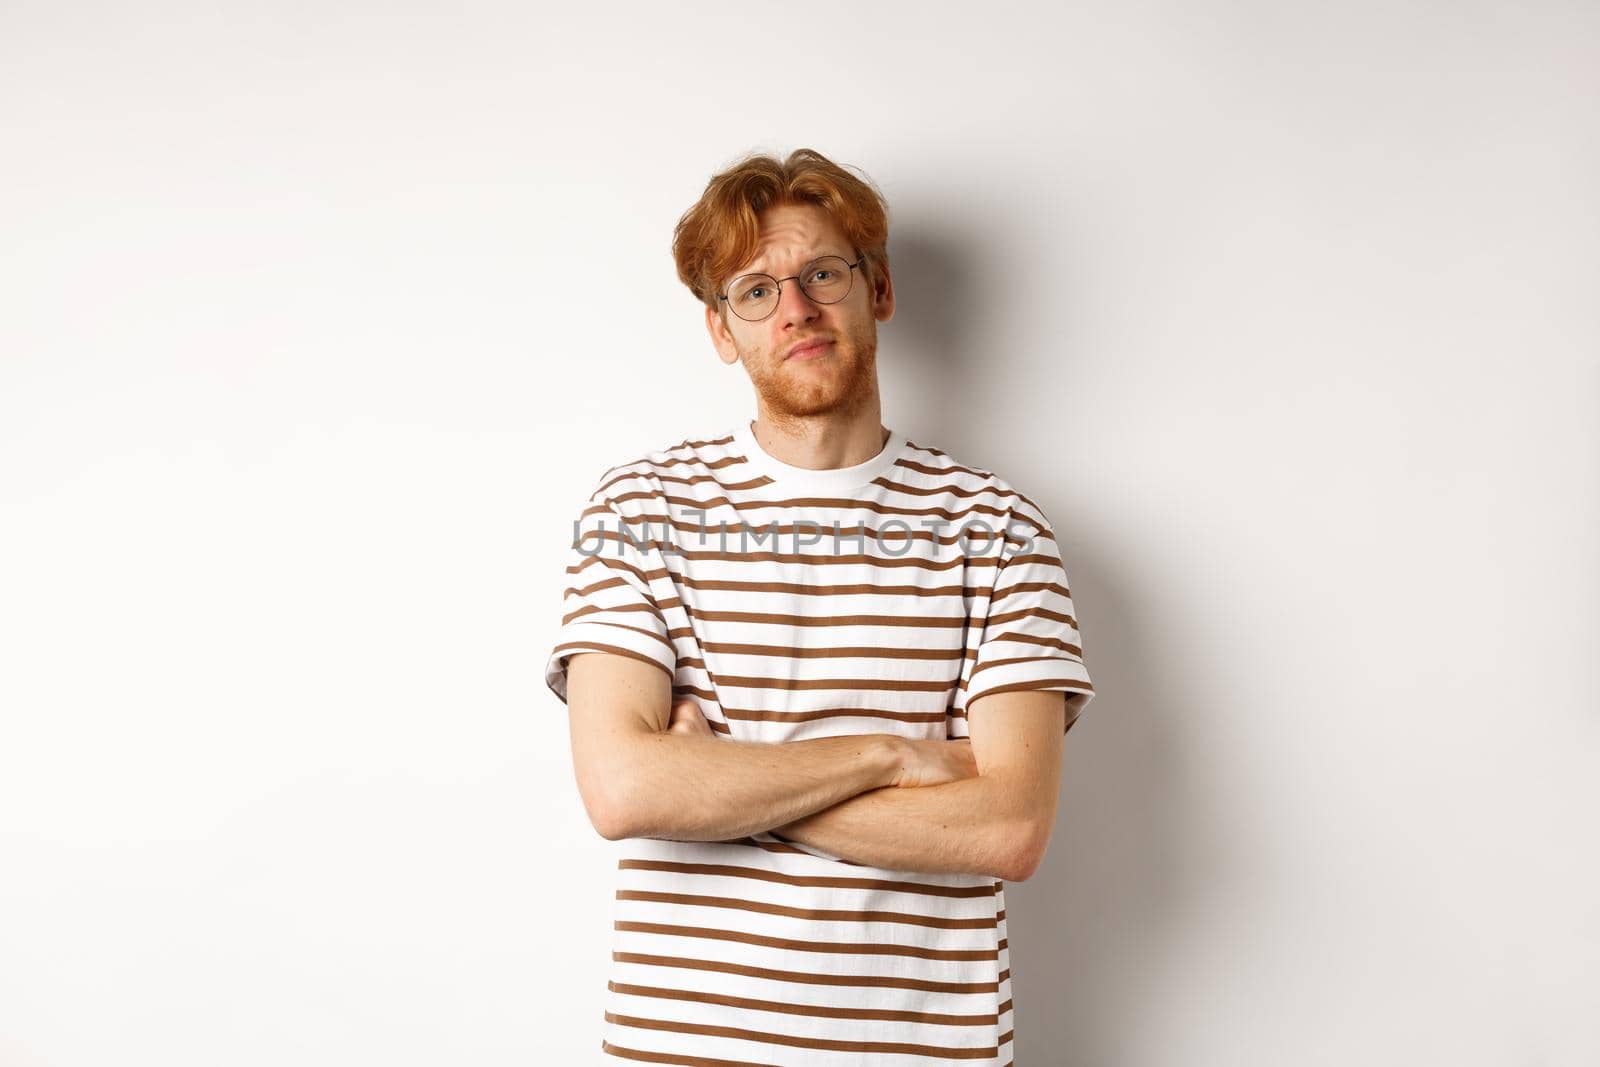 Teenage redhead guy in glasses cross arms on chest, looking skeptical and unamused at camera, standing over white background.